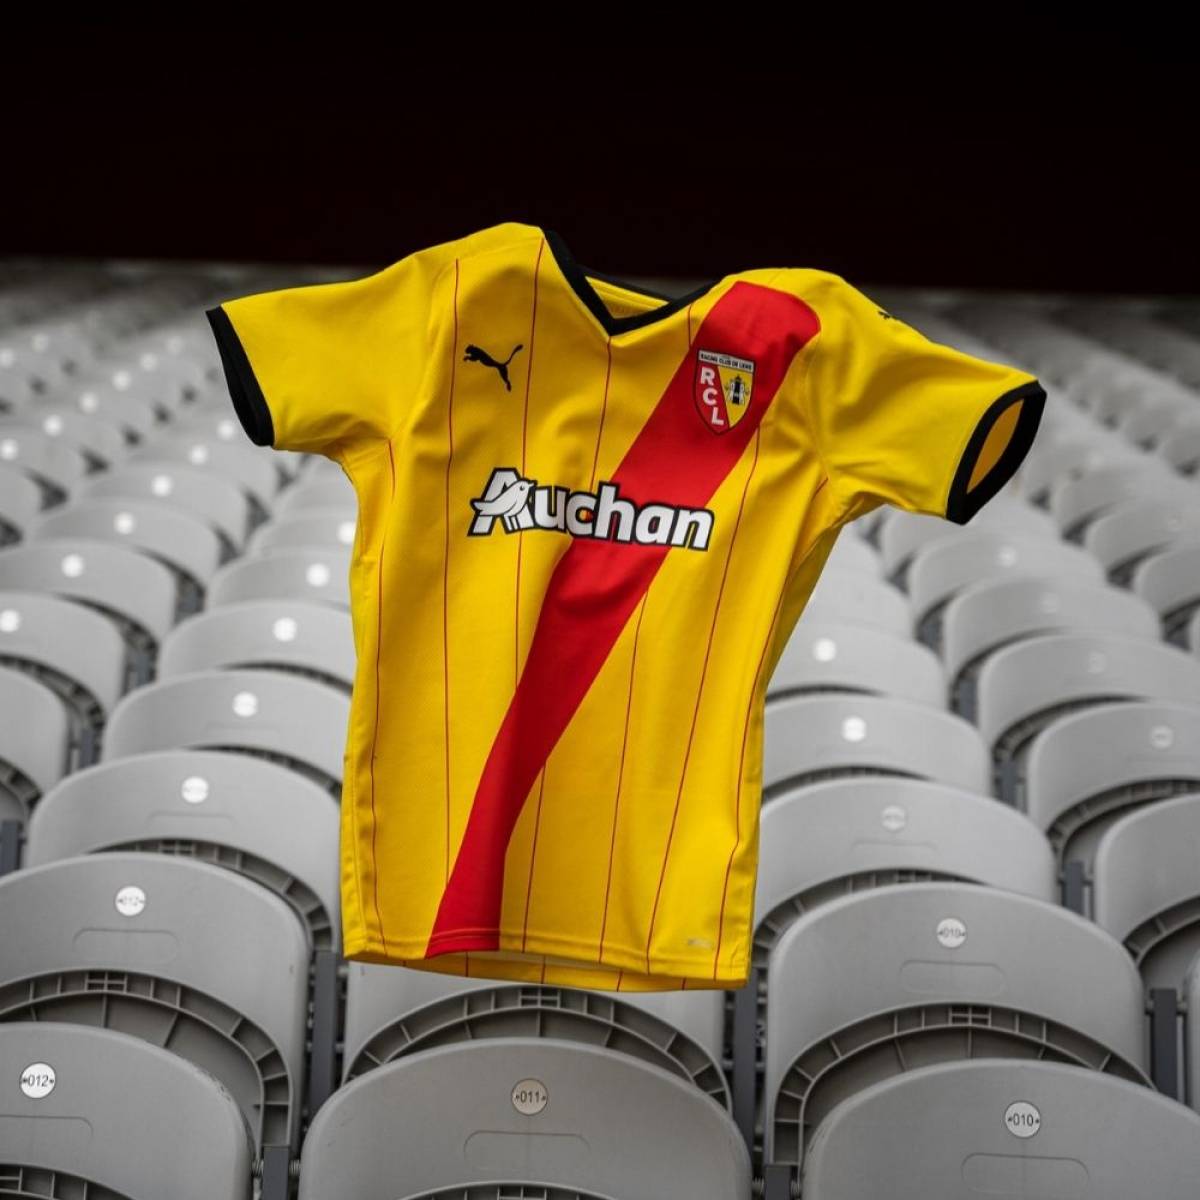 lens maillot